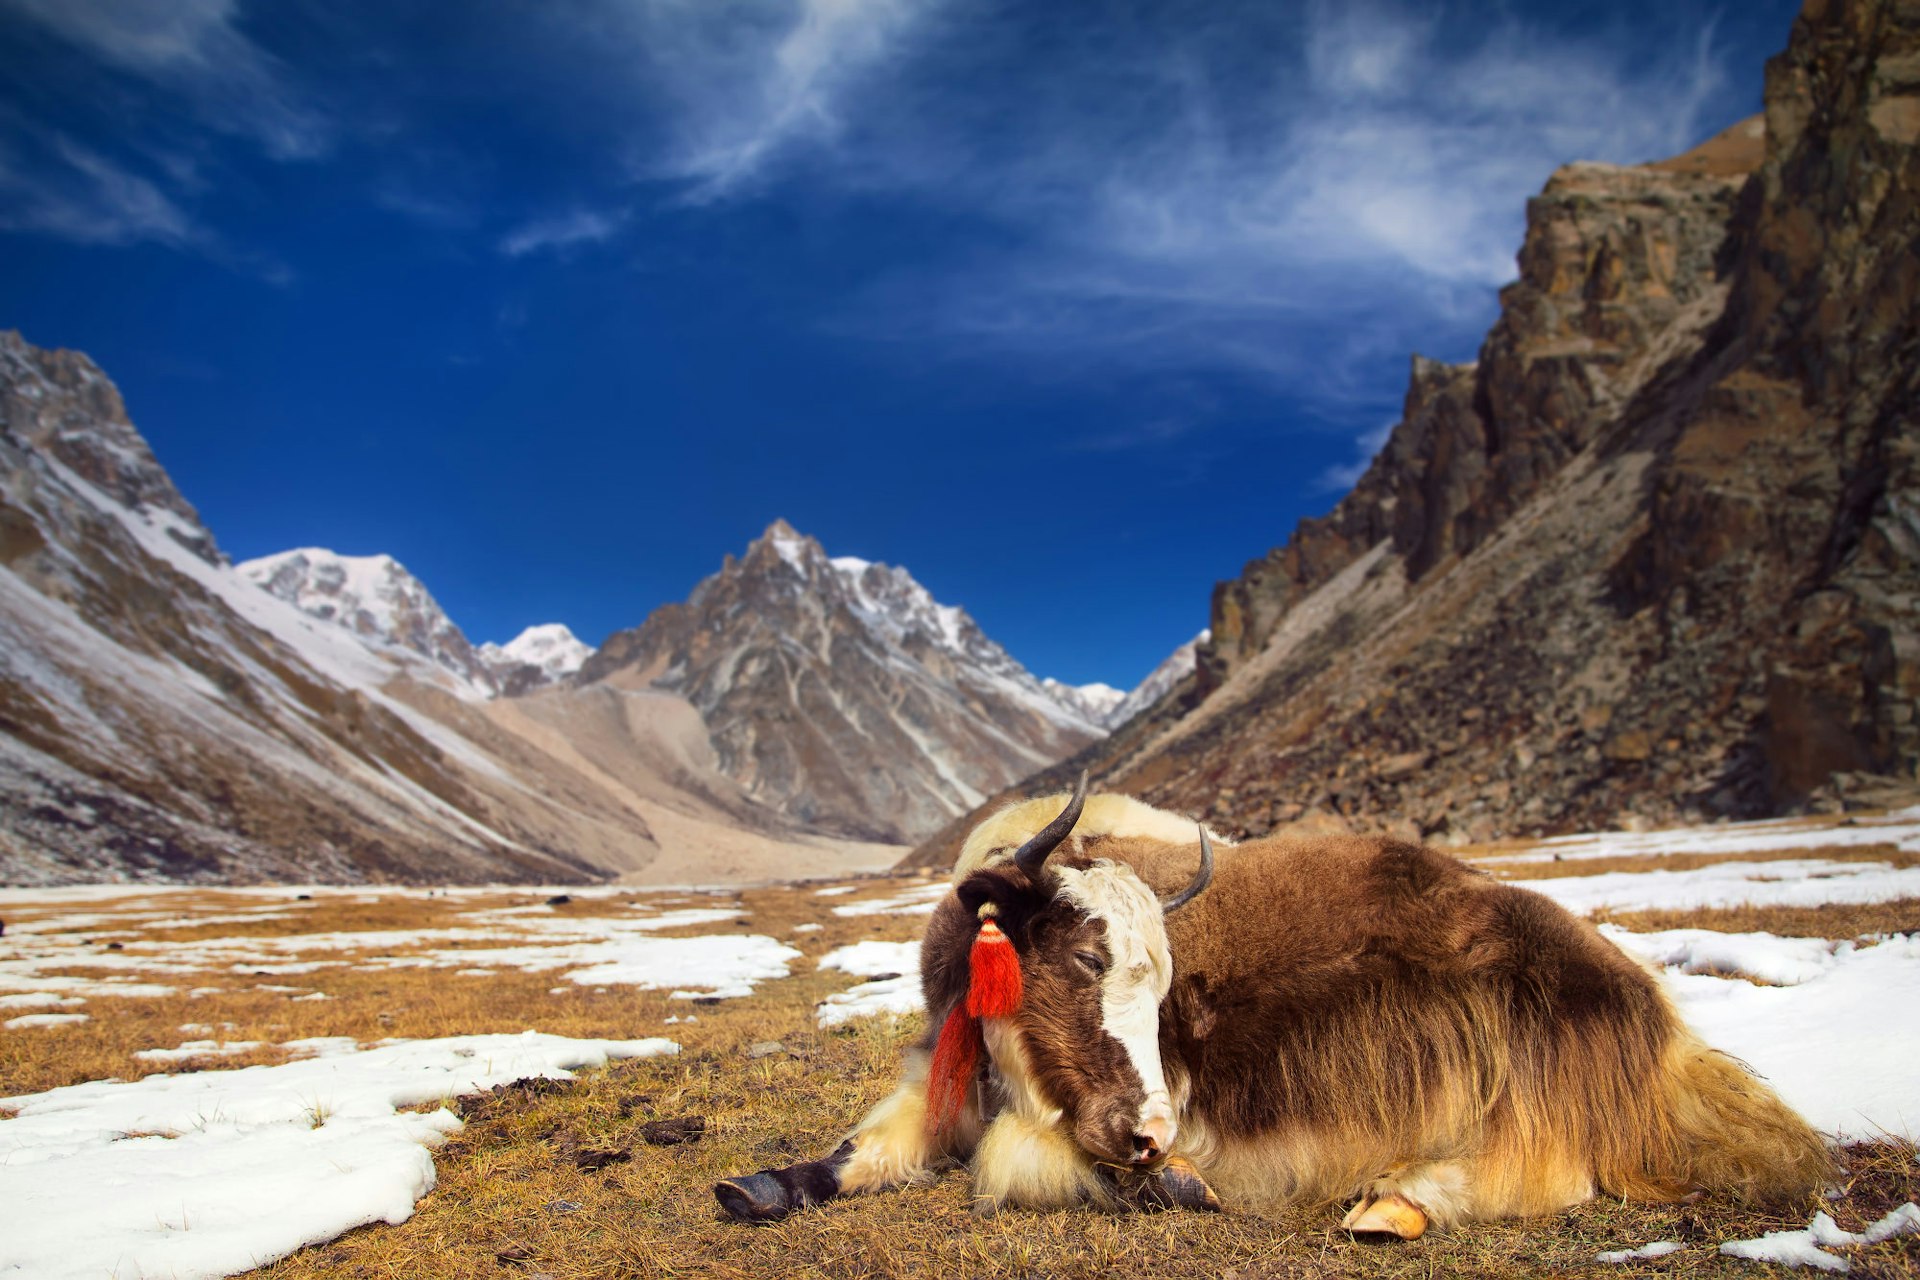 Yak resting in a remote mountain valley in Bhutan © jankovoy / Getty Images